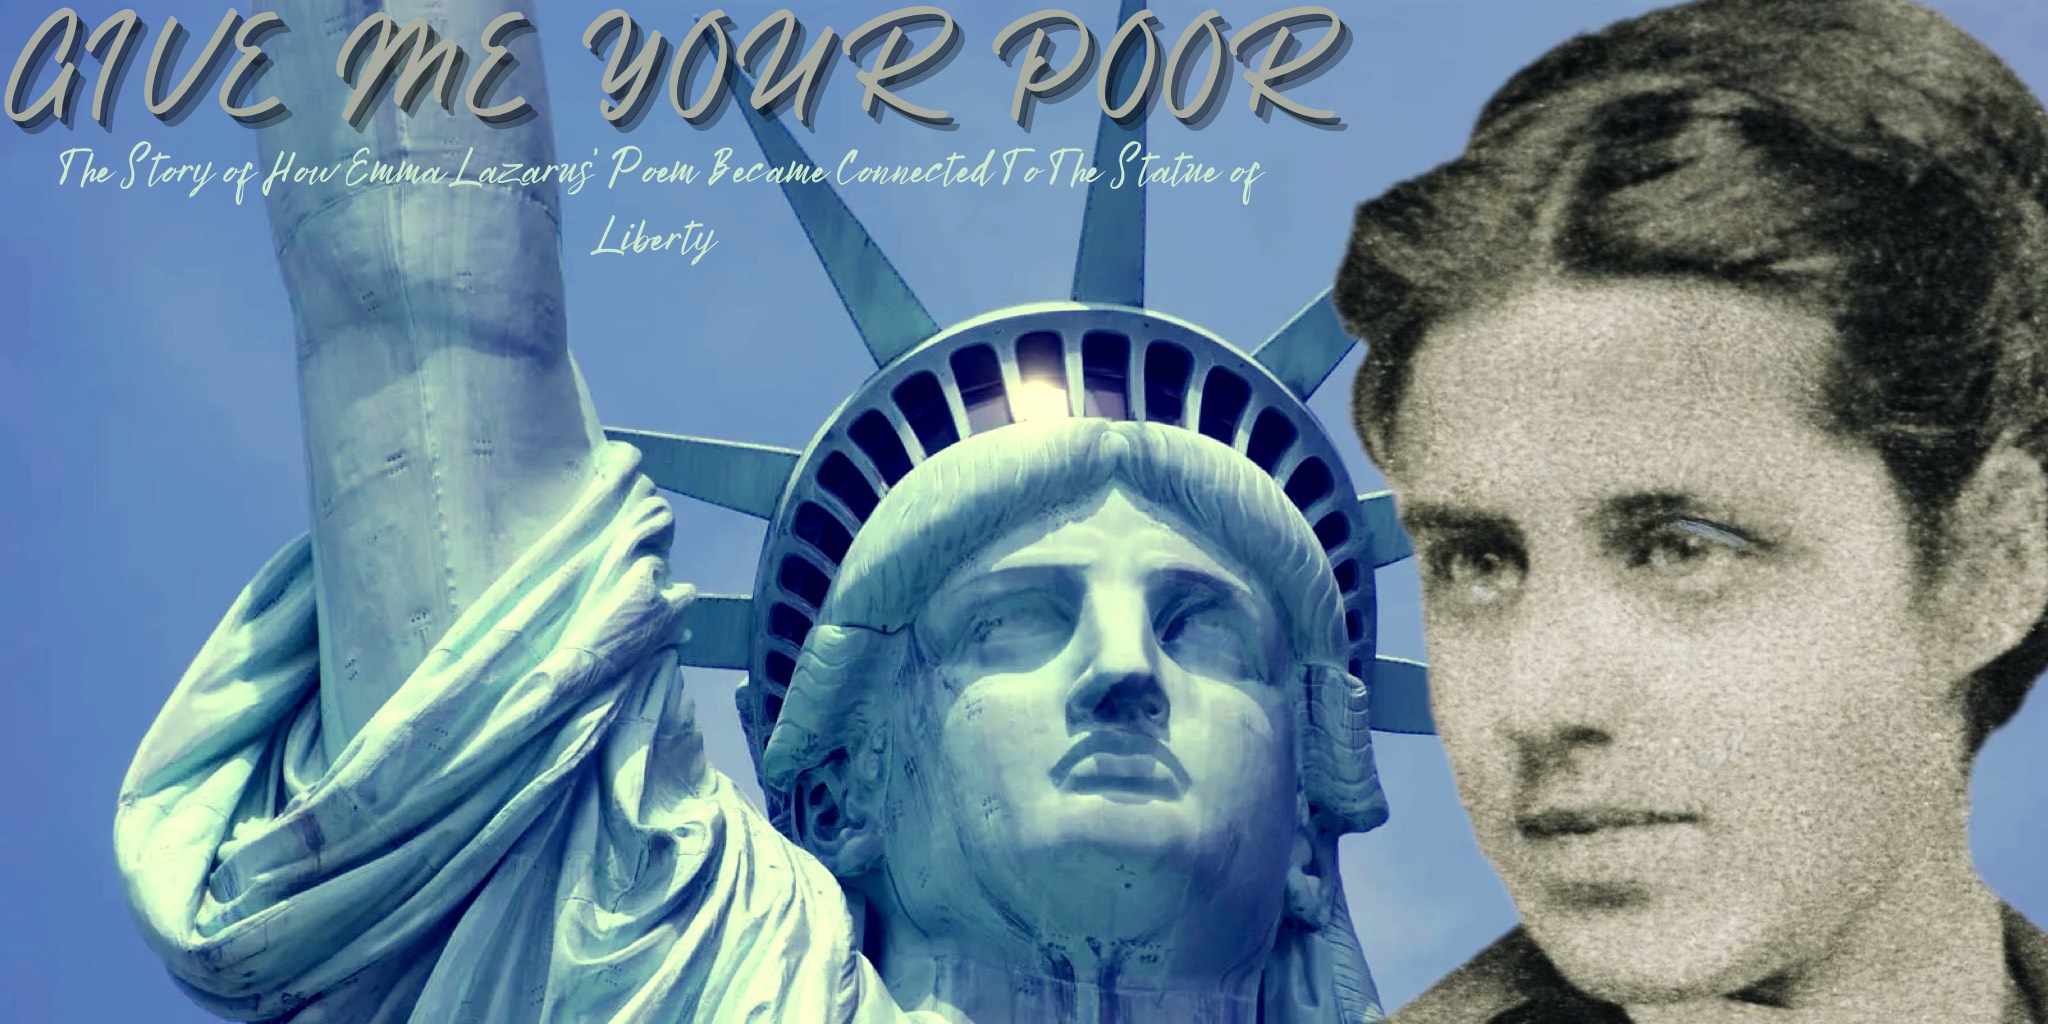 Give Me Your Poor: The Story of How Emma Lazarus' Poem Became Eternally Connected To The Statue of Liberty